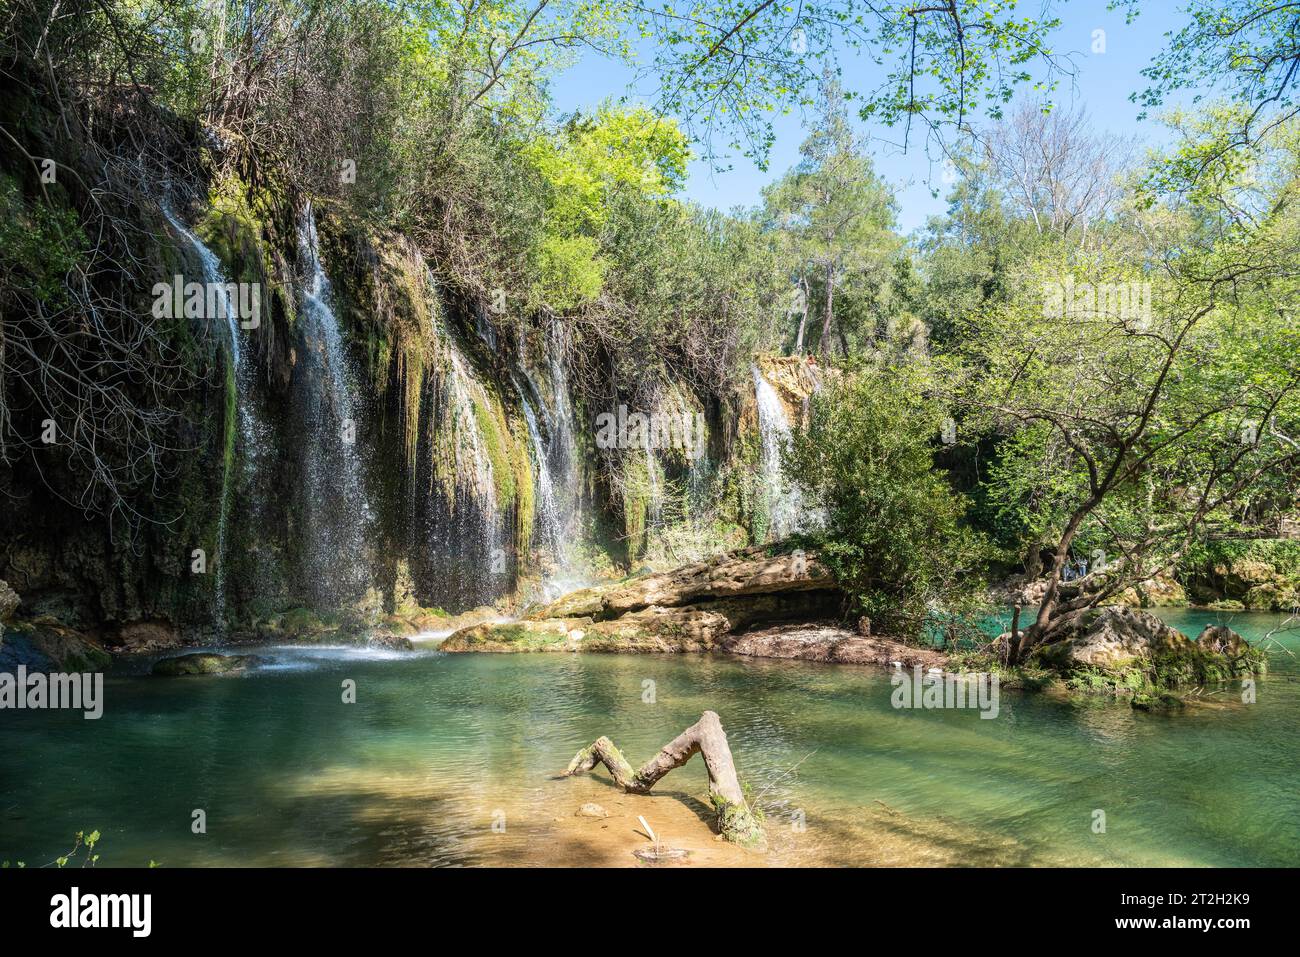 Kursunlu waterfall in Antalya, Turkey. The waterfall is on one of the tributaries of the Aksu River, where the tributary drops from Antalya's plateau Stock Photo